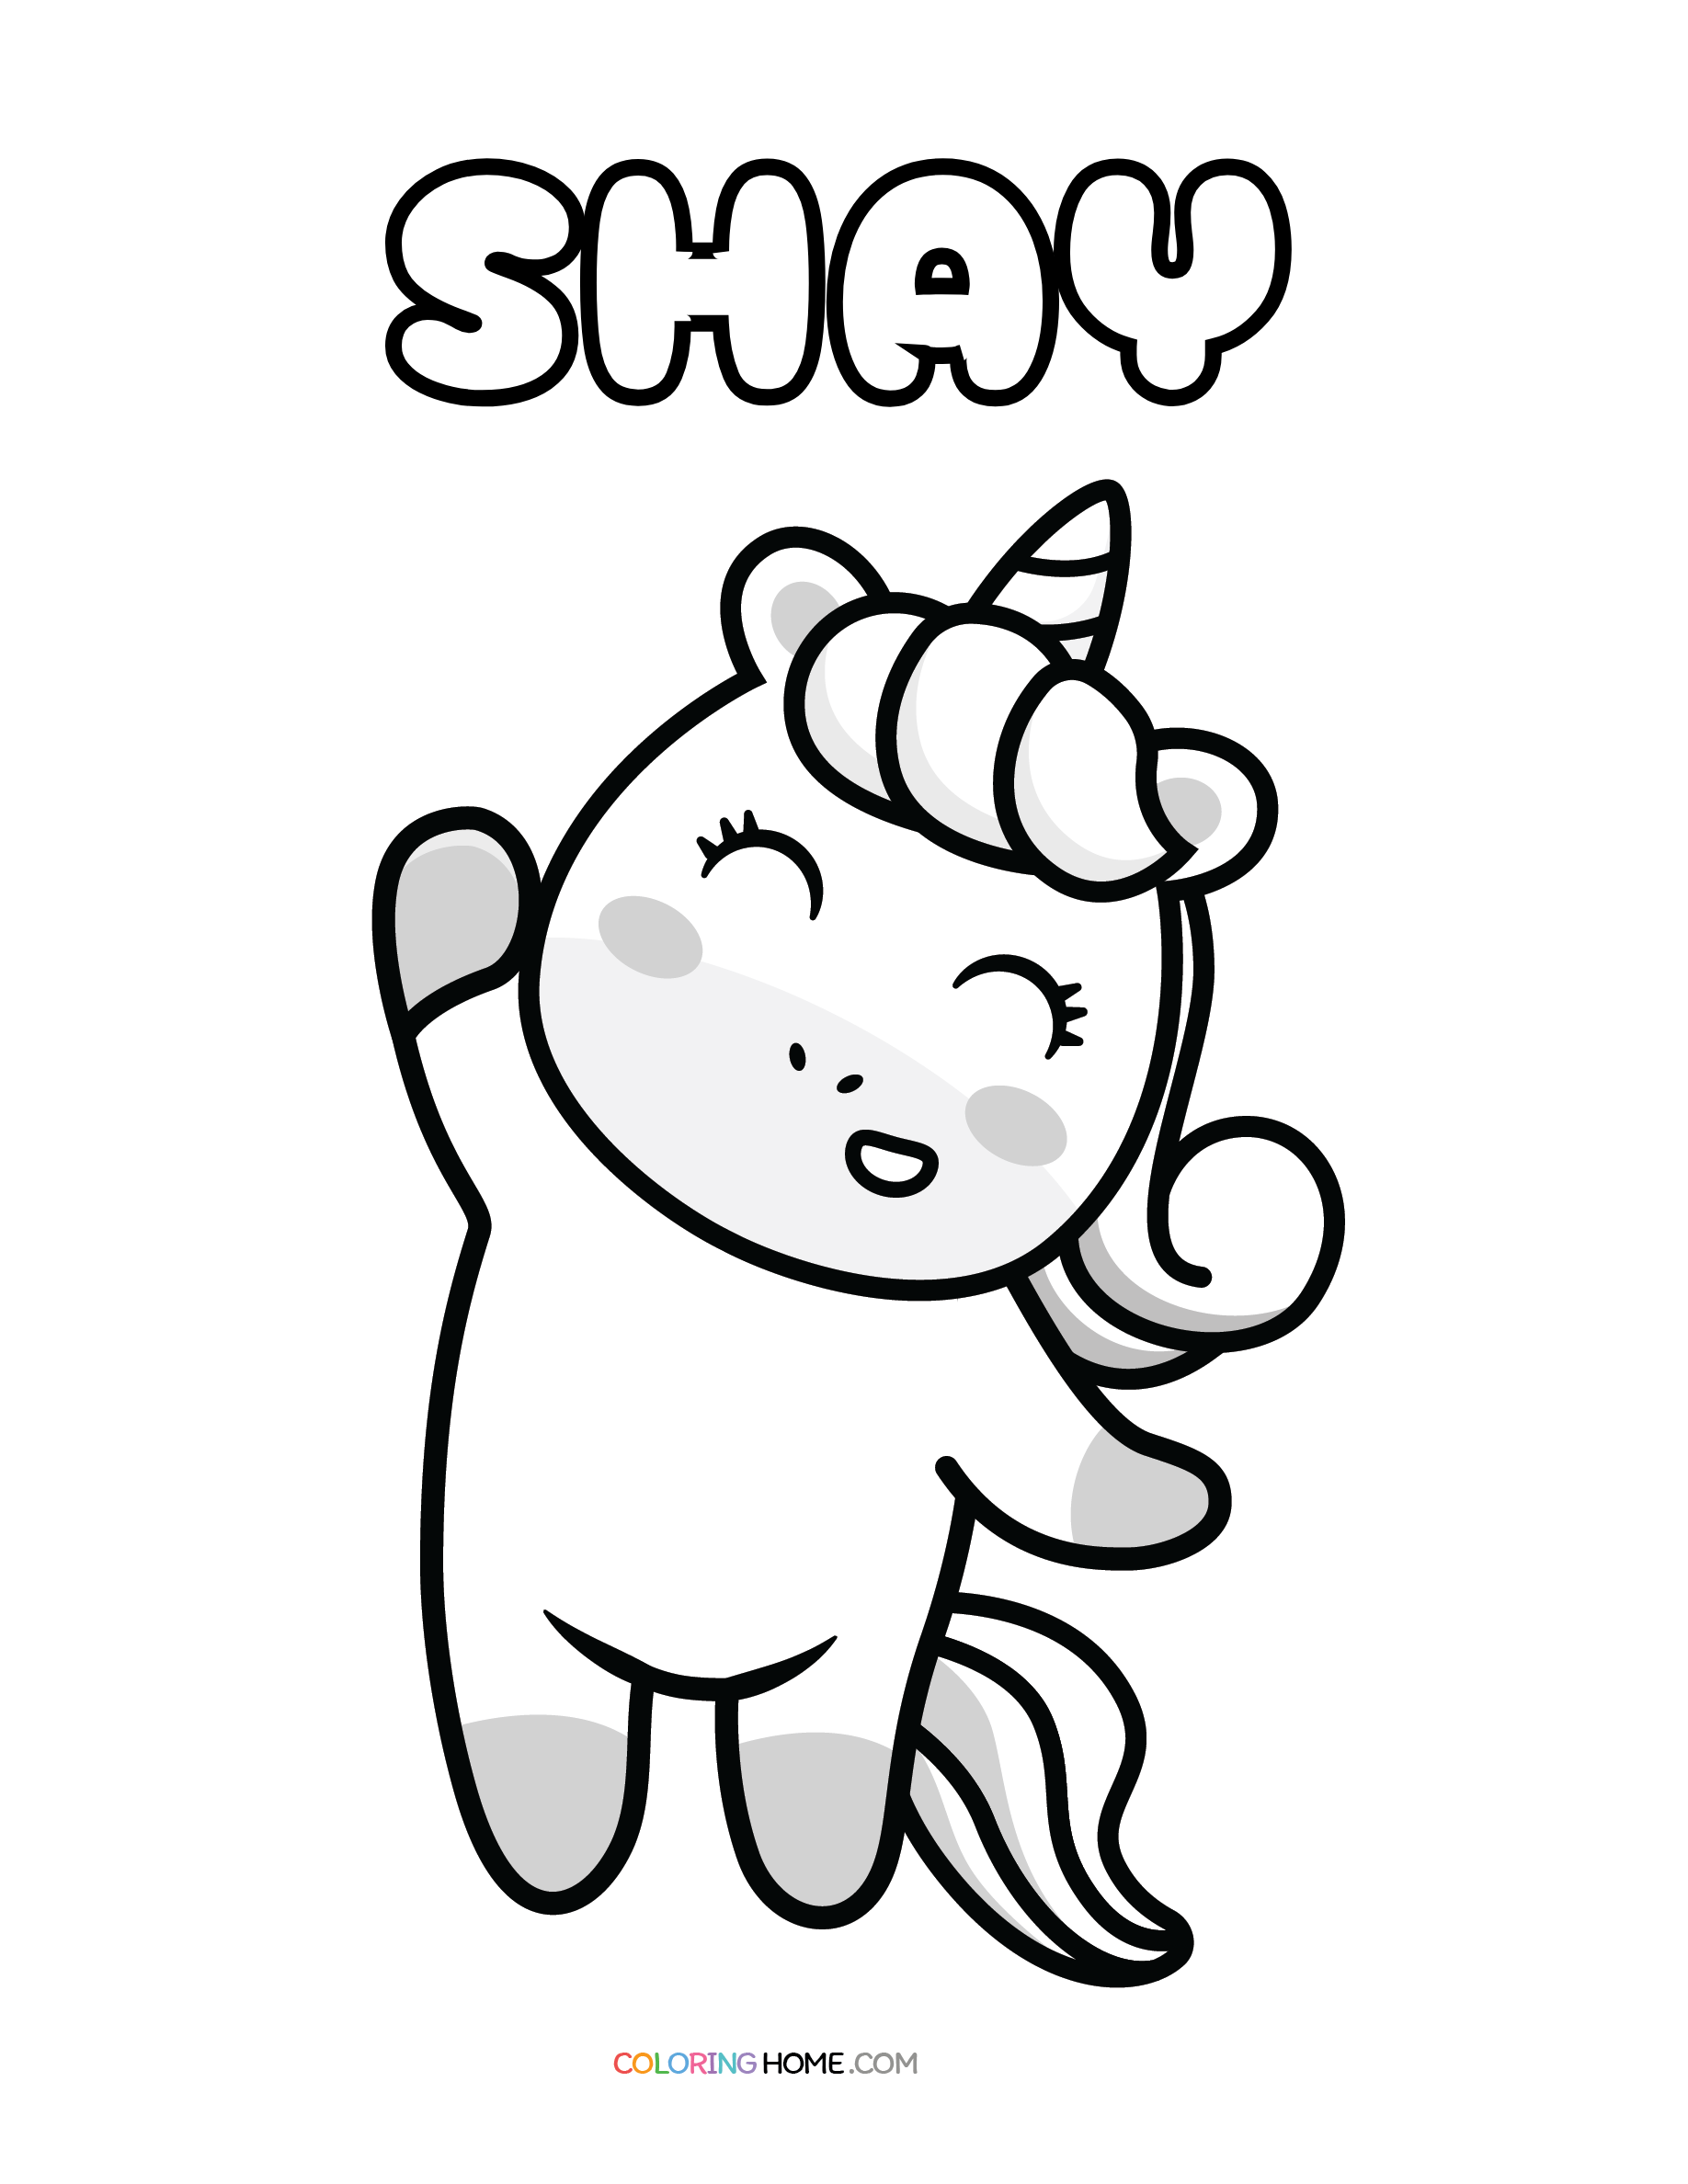 Shay unicorn coloring page